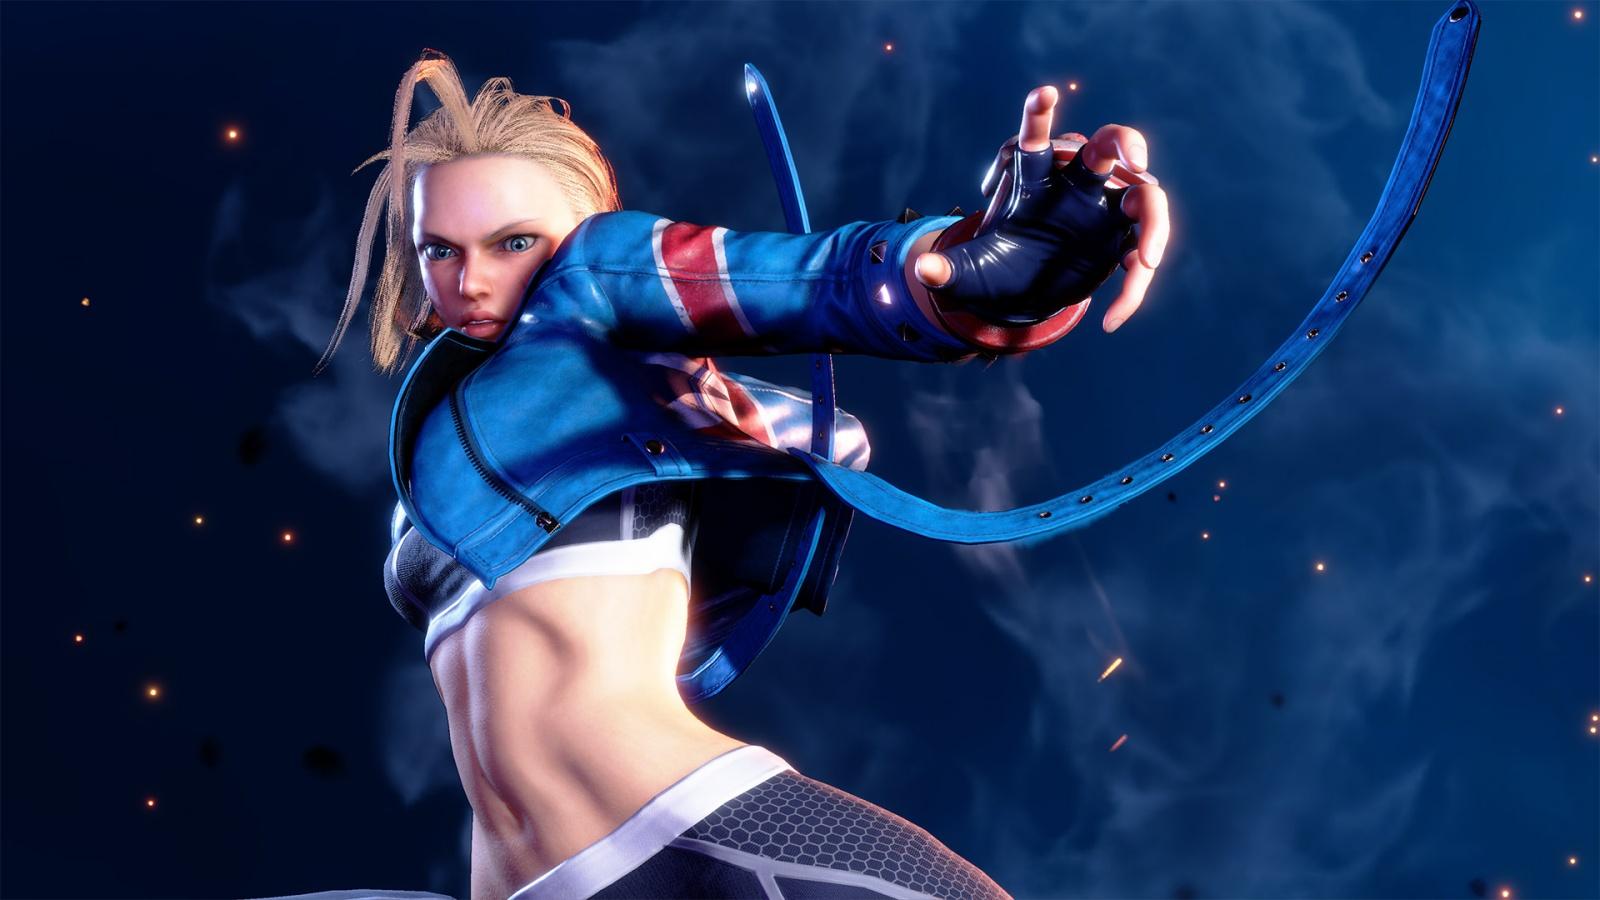 Street Fighter 6 is most popular fighting game at EVO before its